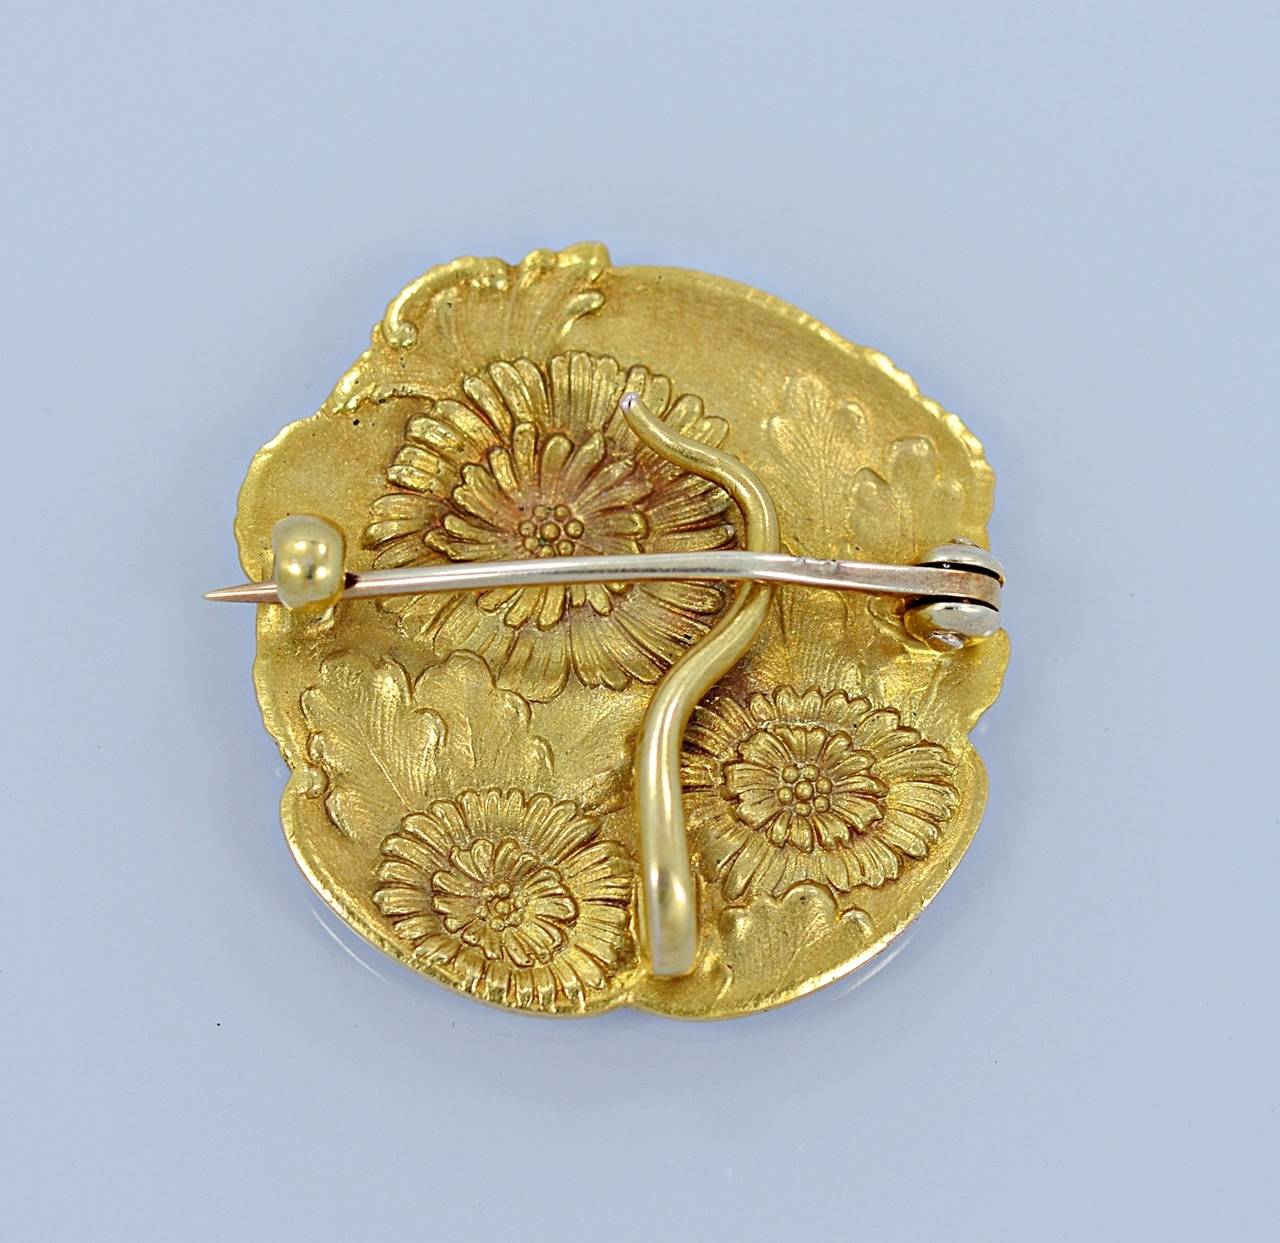 A meticulously hand crafted vintage Art Nouveau 14K Yellow Gold brooch featuring the profile of a lady with flowers in her hair and surrounding flowers and leaves. This craftsmanship carries to the reverse side where you will find more flowers and